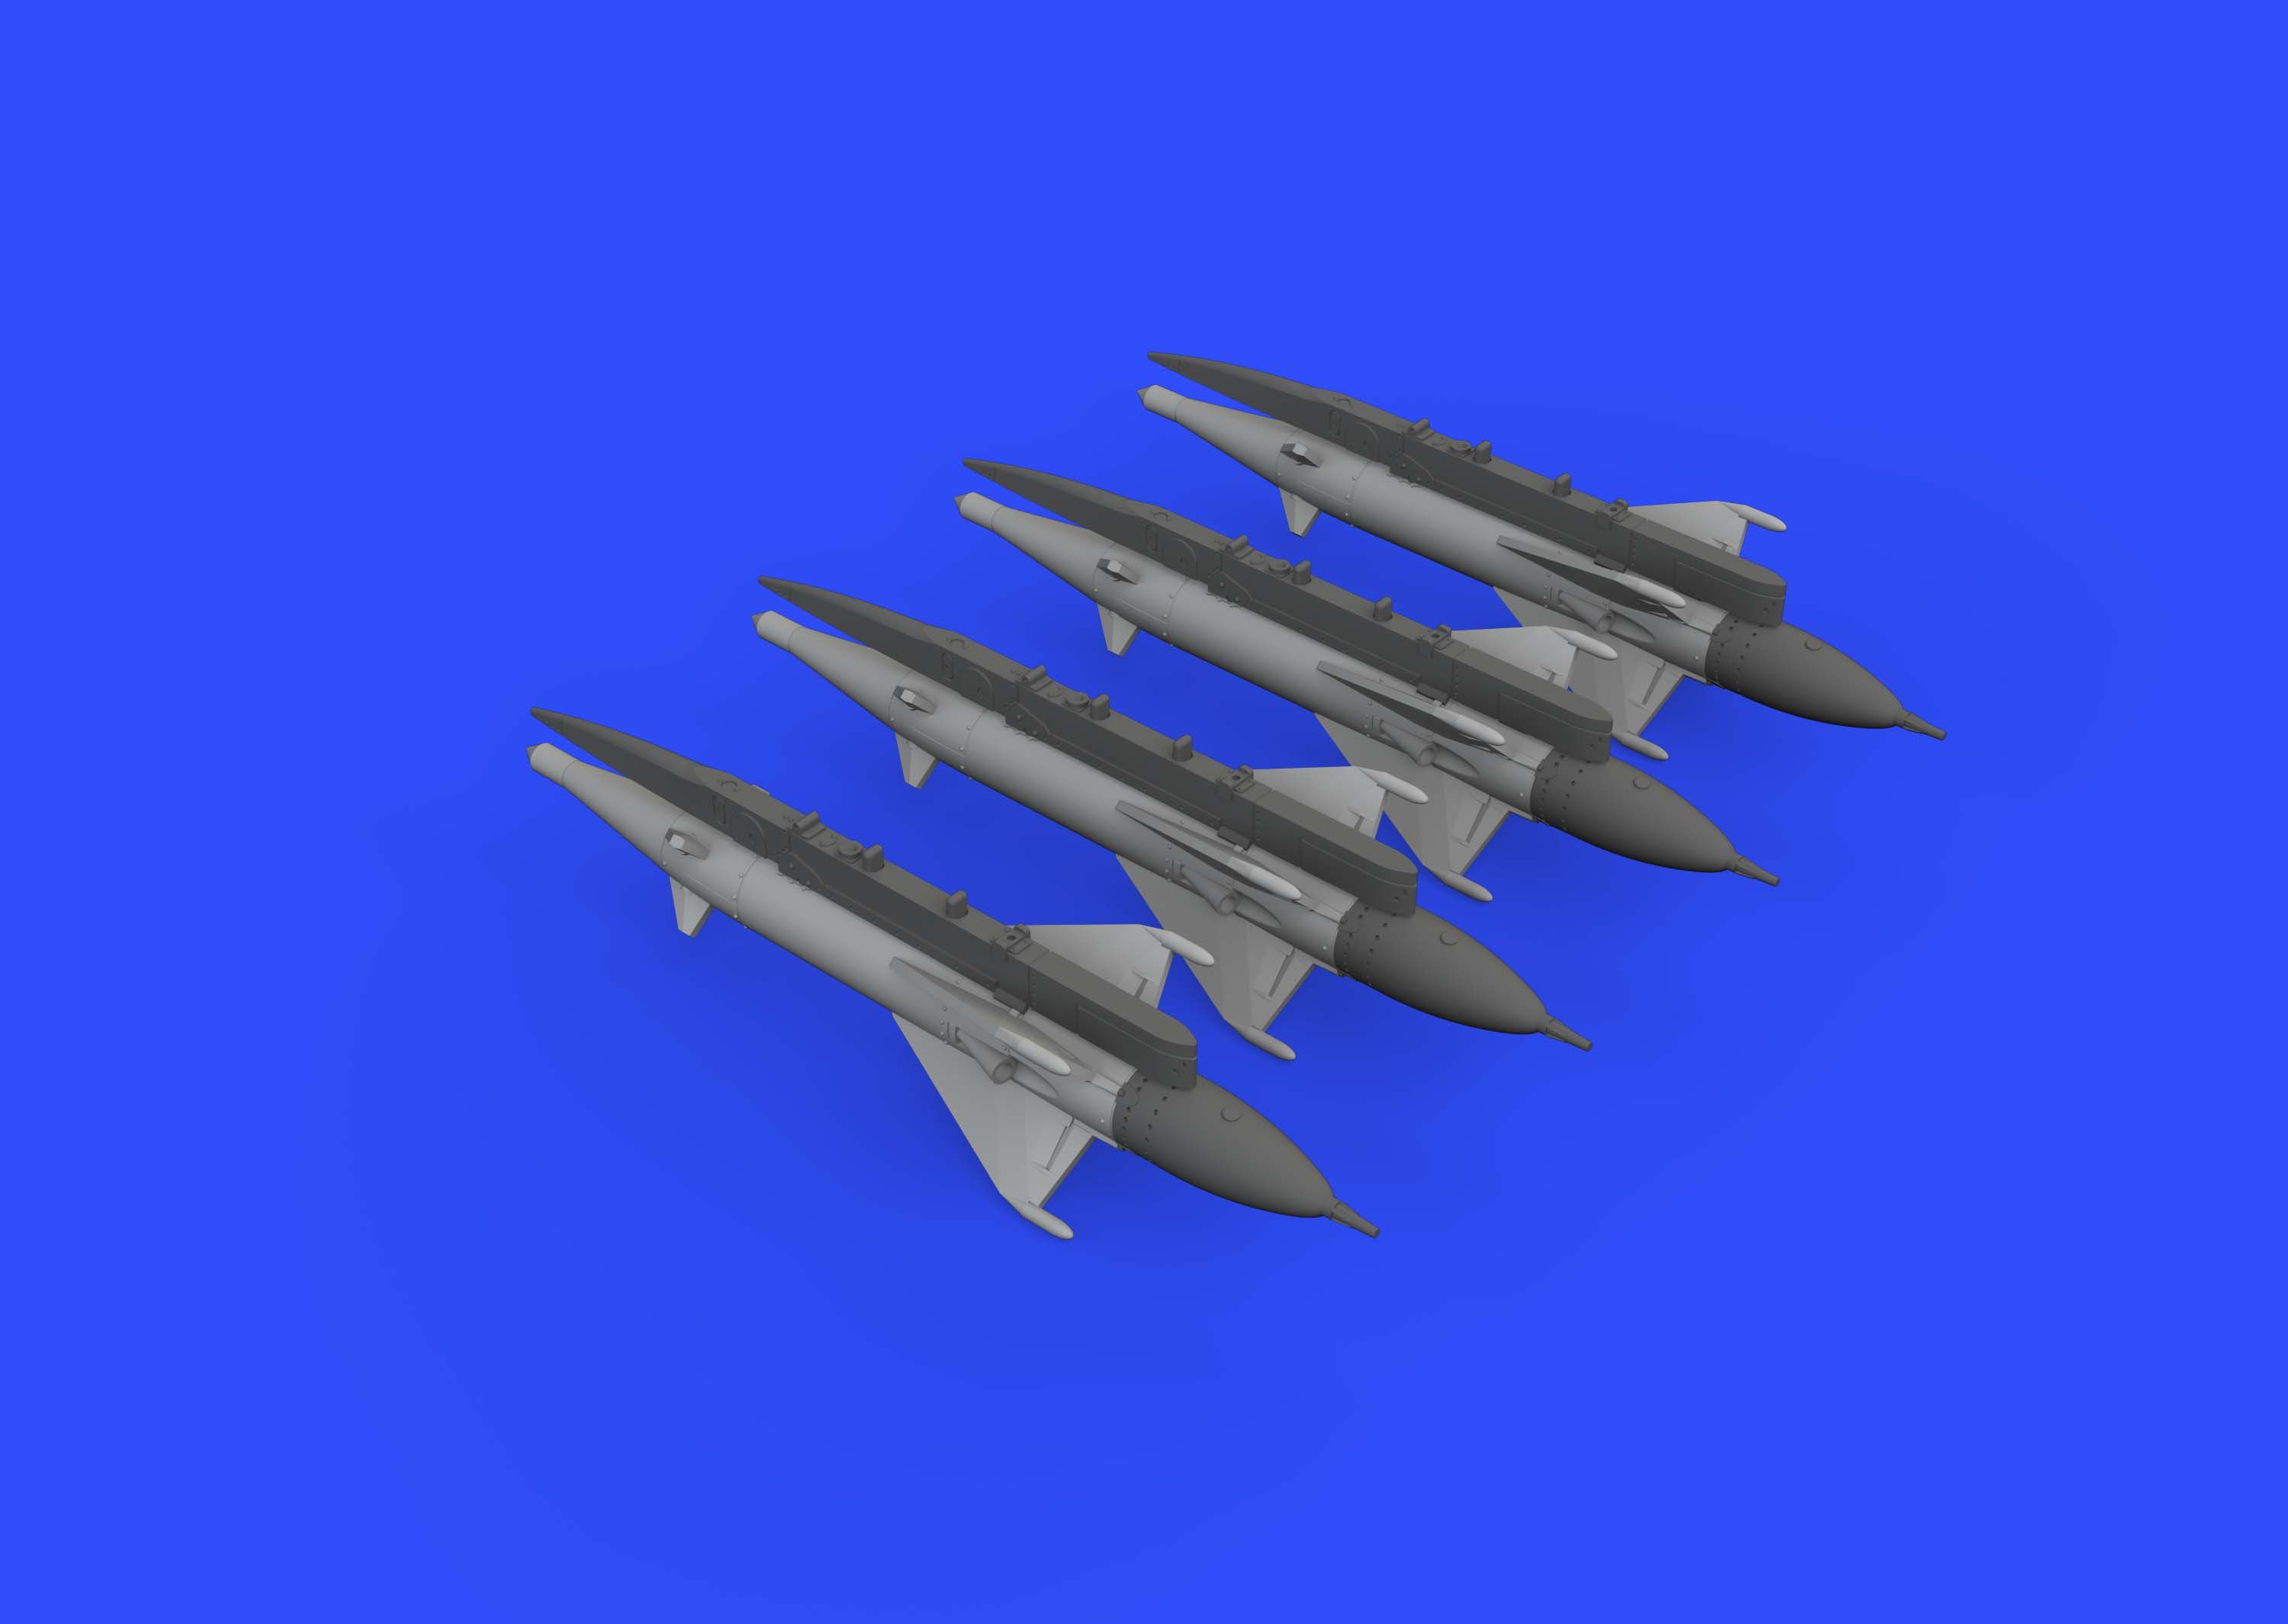 Additions (3D resin printing) 1/72 RS-2US missiles for Mikoyan MiG-21 (designed to be used with Eduard kits)